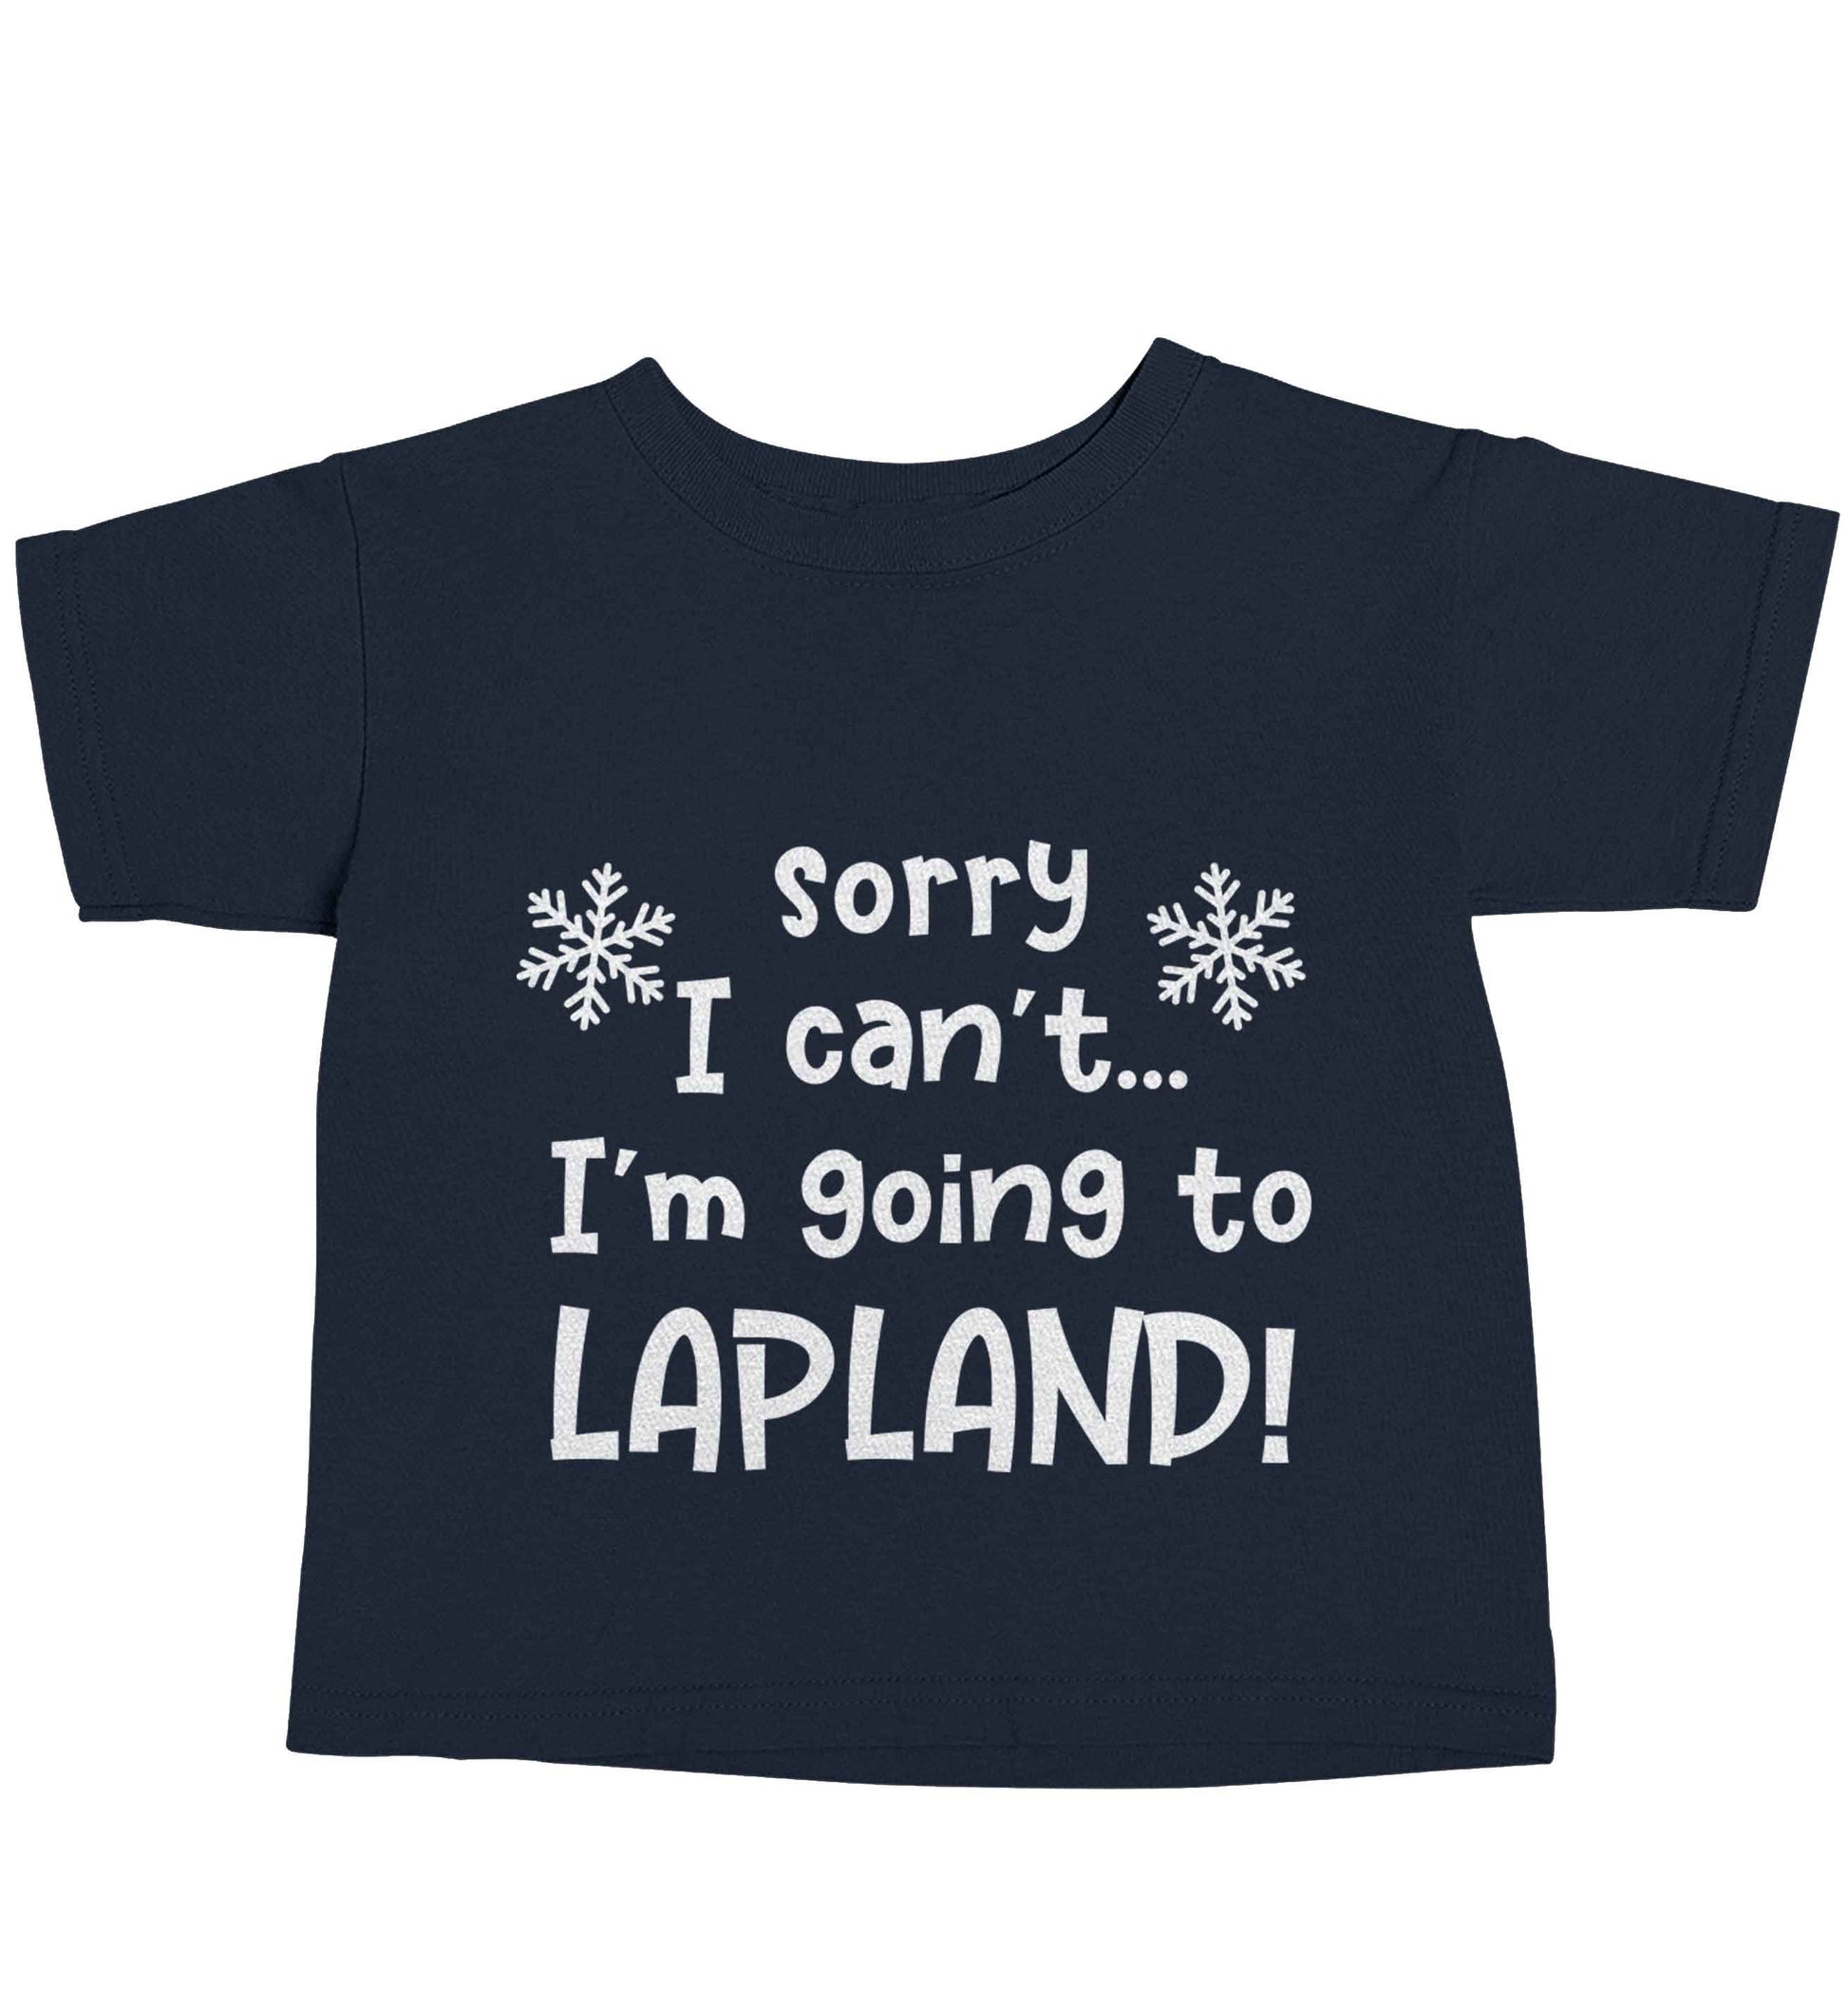 Sorry I can't I'm going to Lapland navy baby toddler Tshirt 2 Years